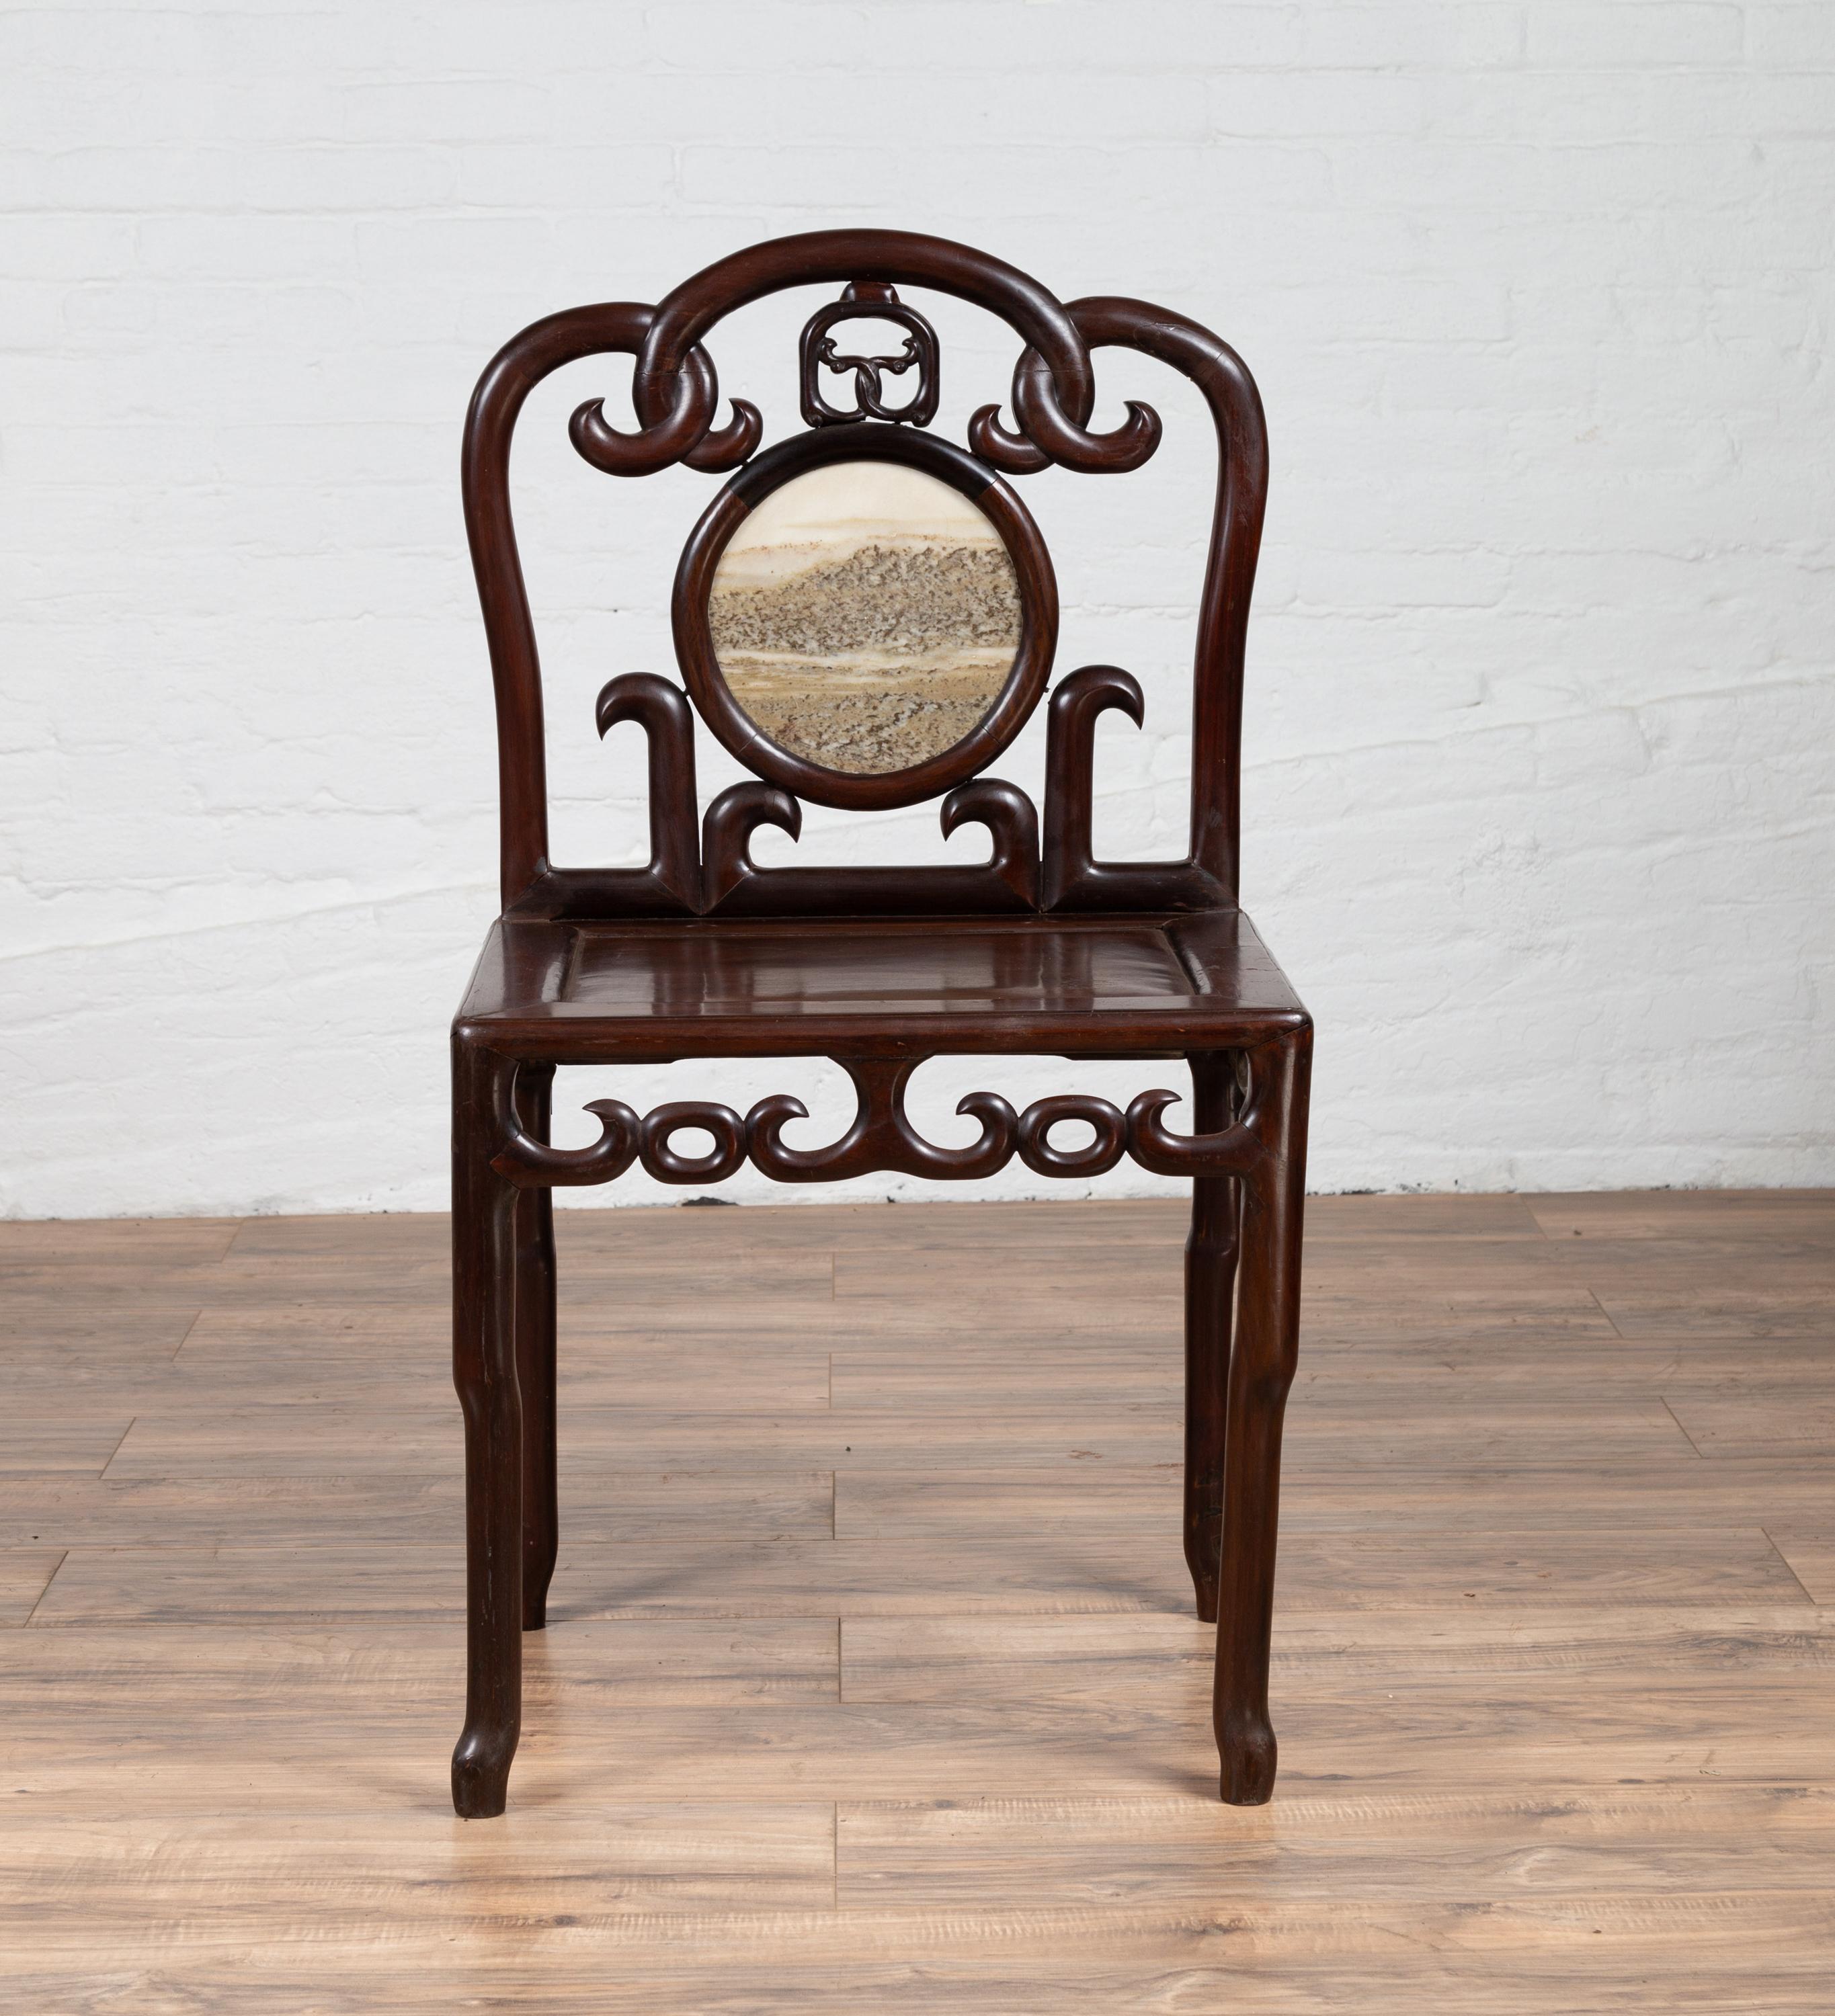 An antique Chinese rosewood side chair from the early 20th century, with marble medallion inlay and open fretwork. Born in China during the early years of the 20th century, this exquisite side chair captivates us with its fretwork design, dark